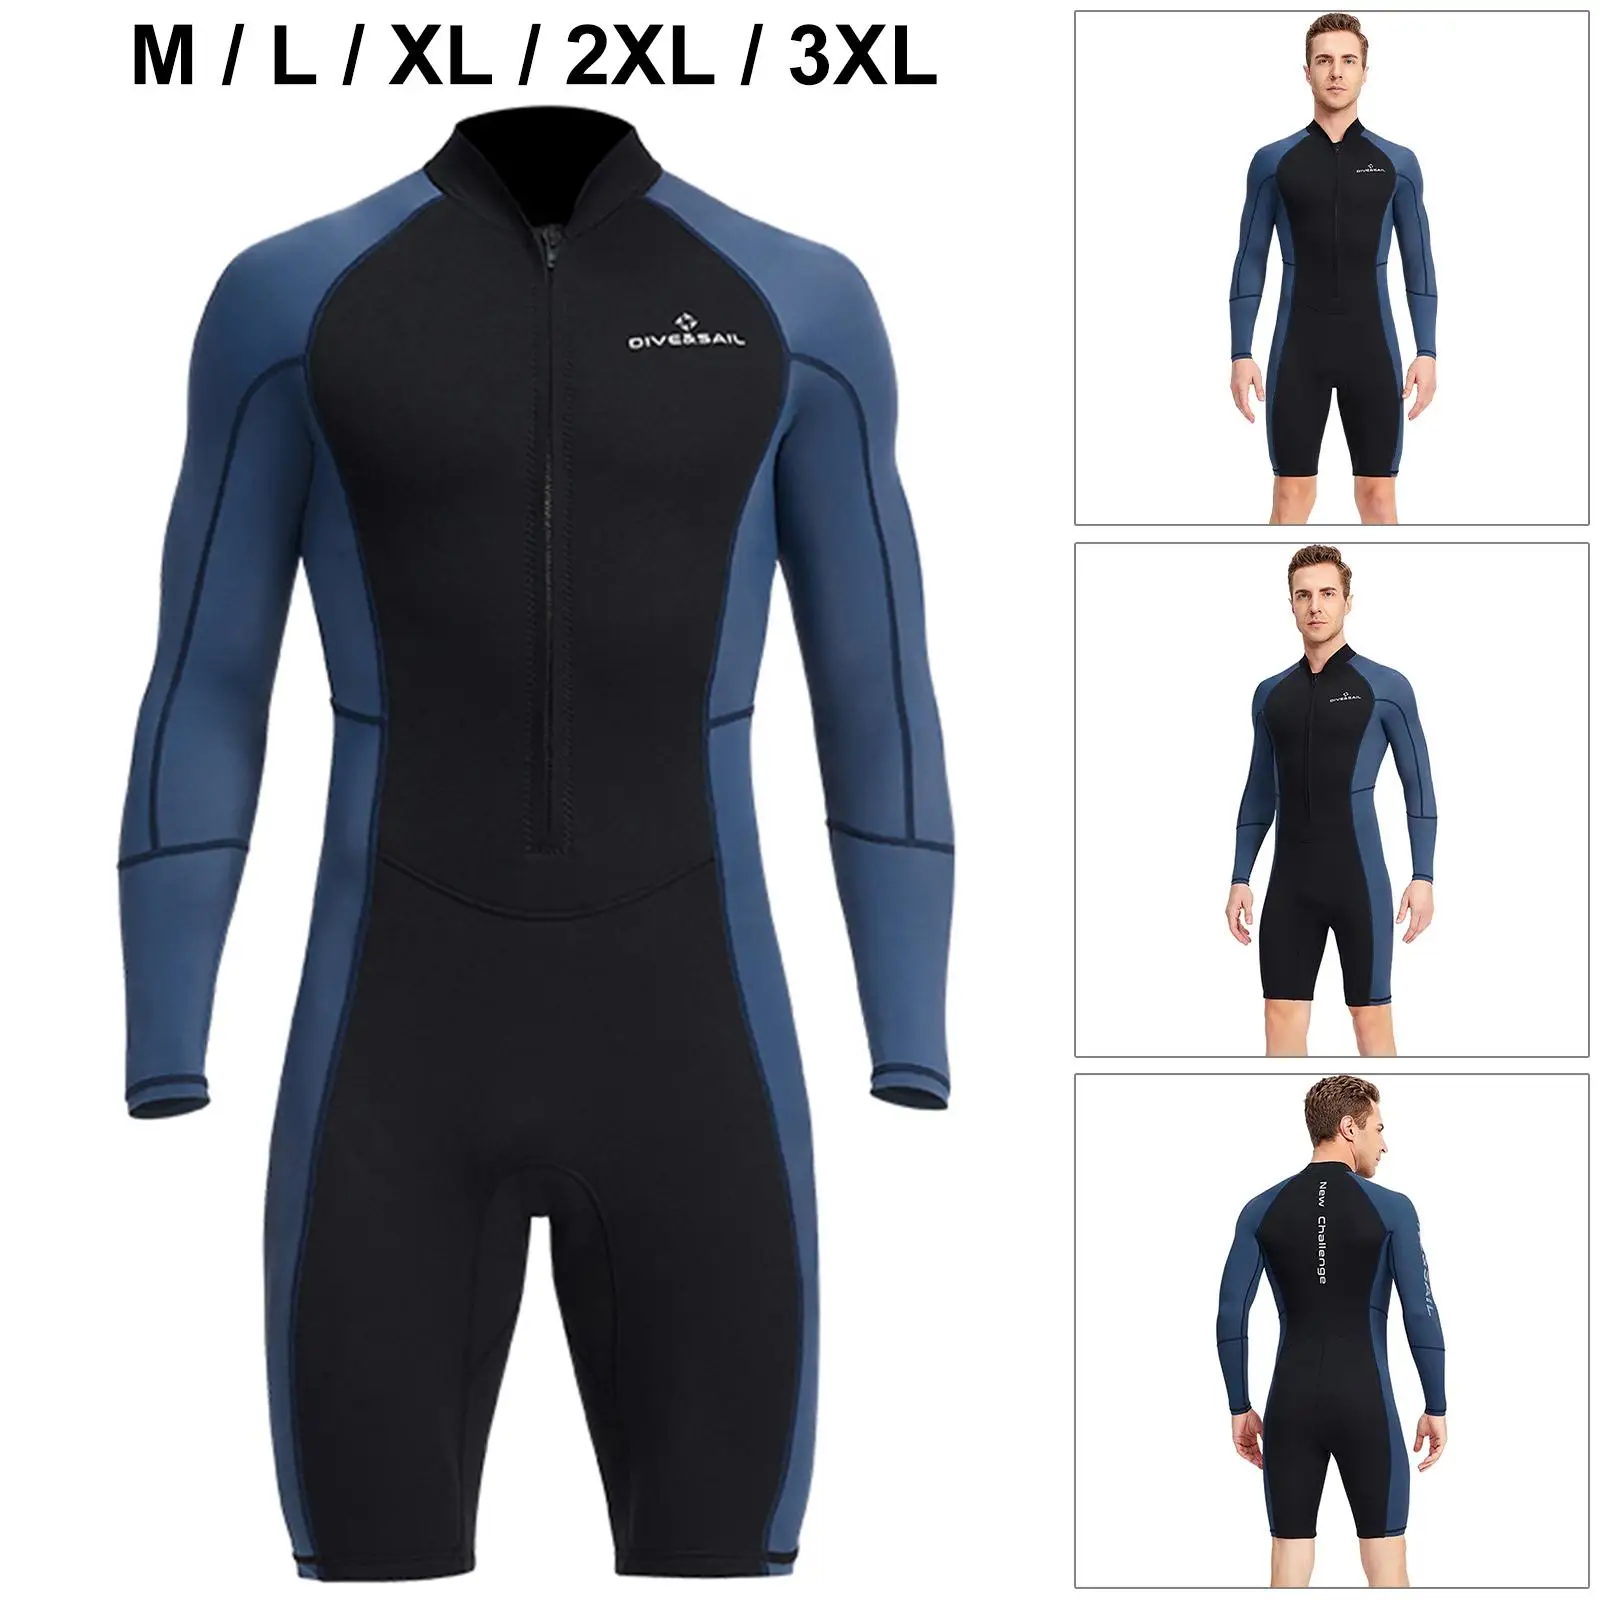 1.5mm Neoprene Men Wetsuit Diving Suit Shorts Keep Warm UV Protection Wet Suit for Kayaking Water Sports Surfing Diving Swimming